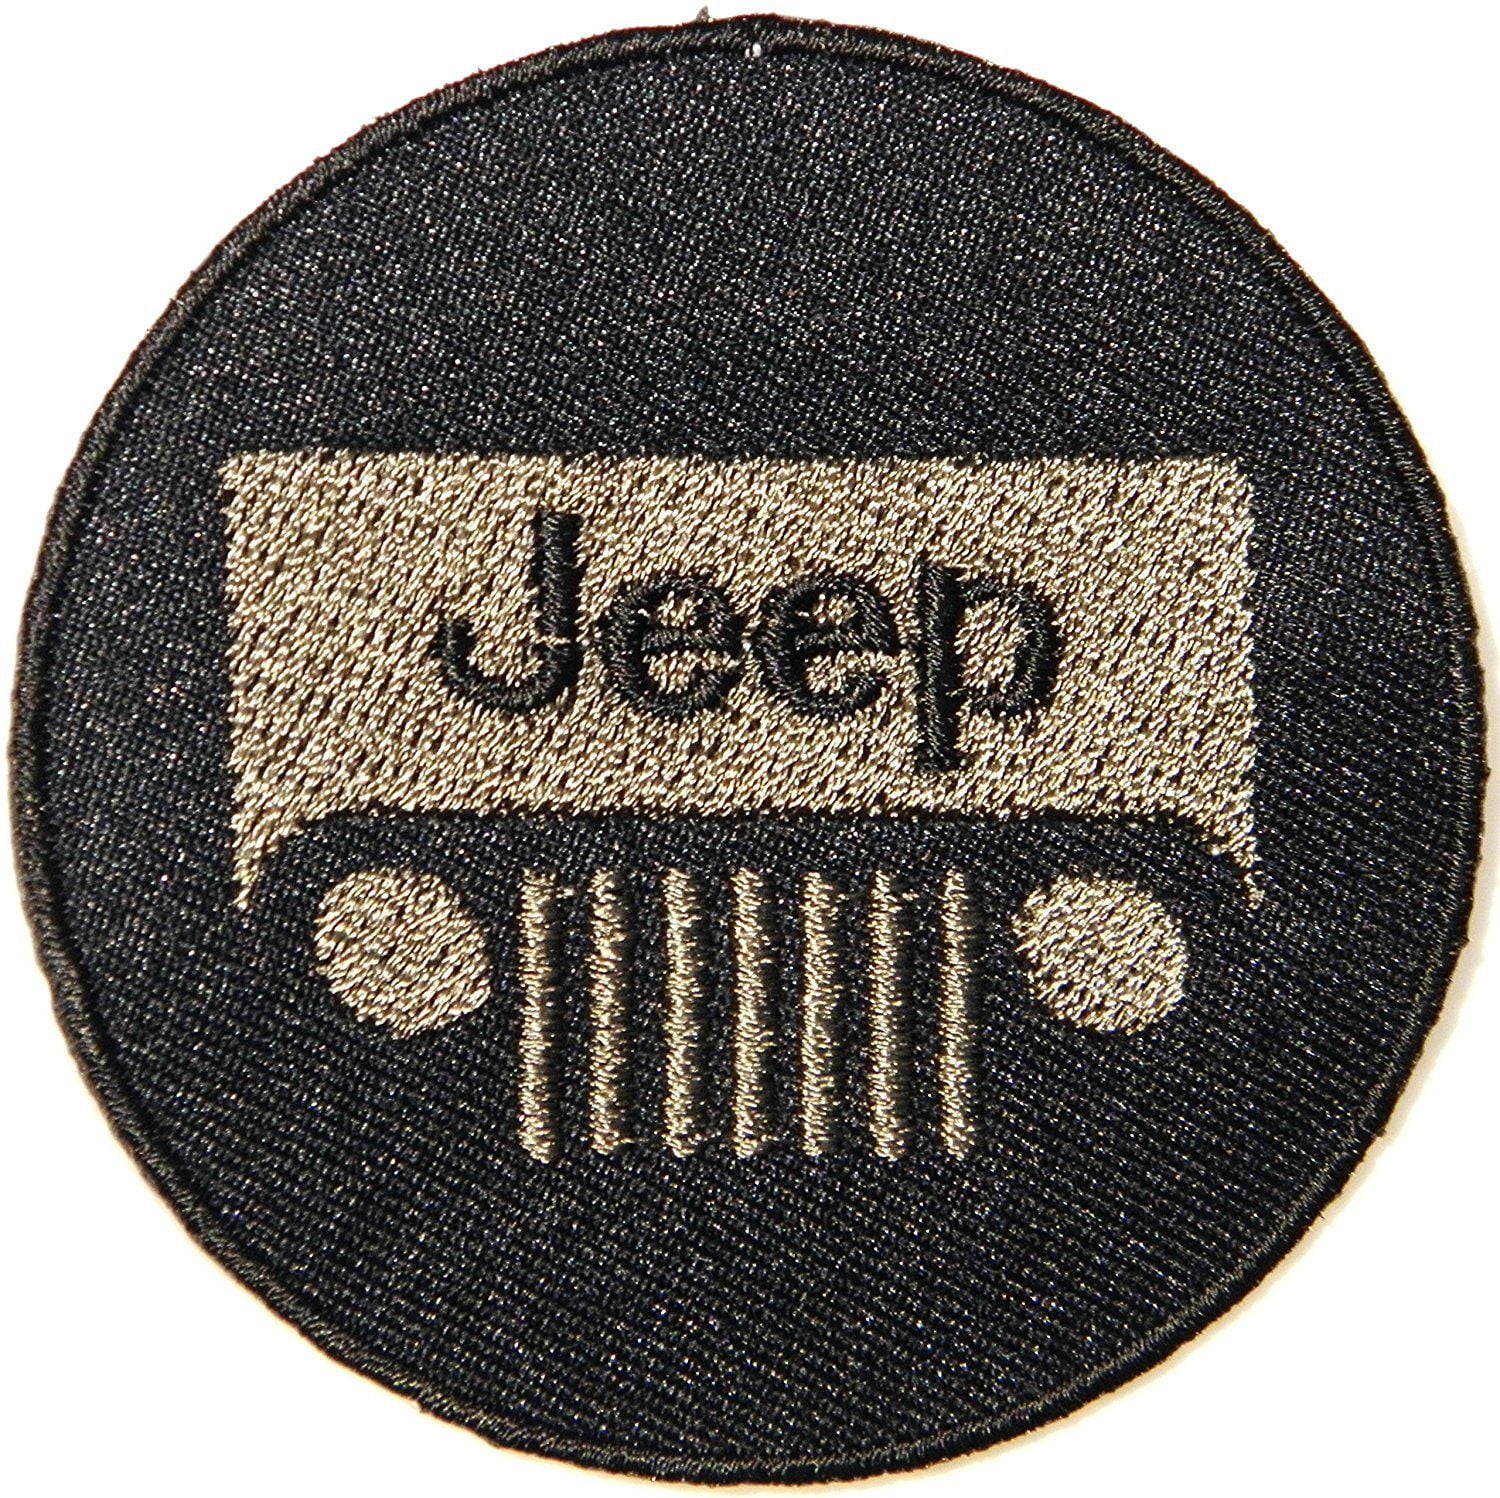 Motor Sport Racing Jeep Embroidered Iron on Sew on Patch Badge For Clothes etc 